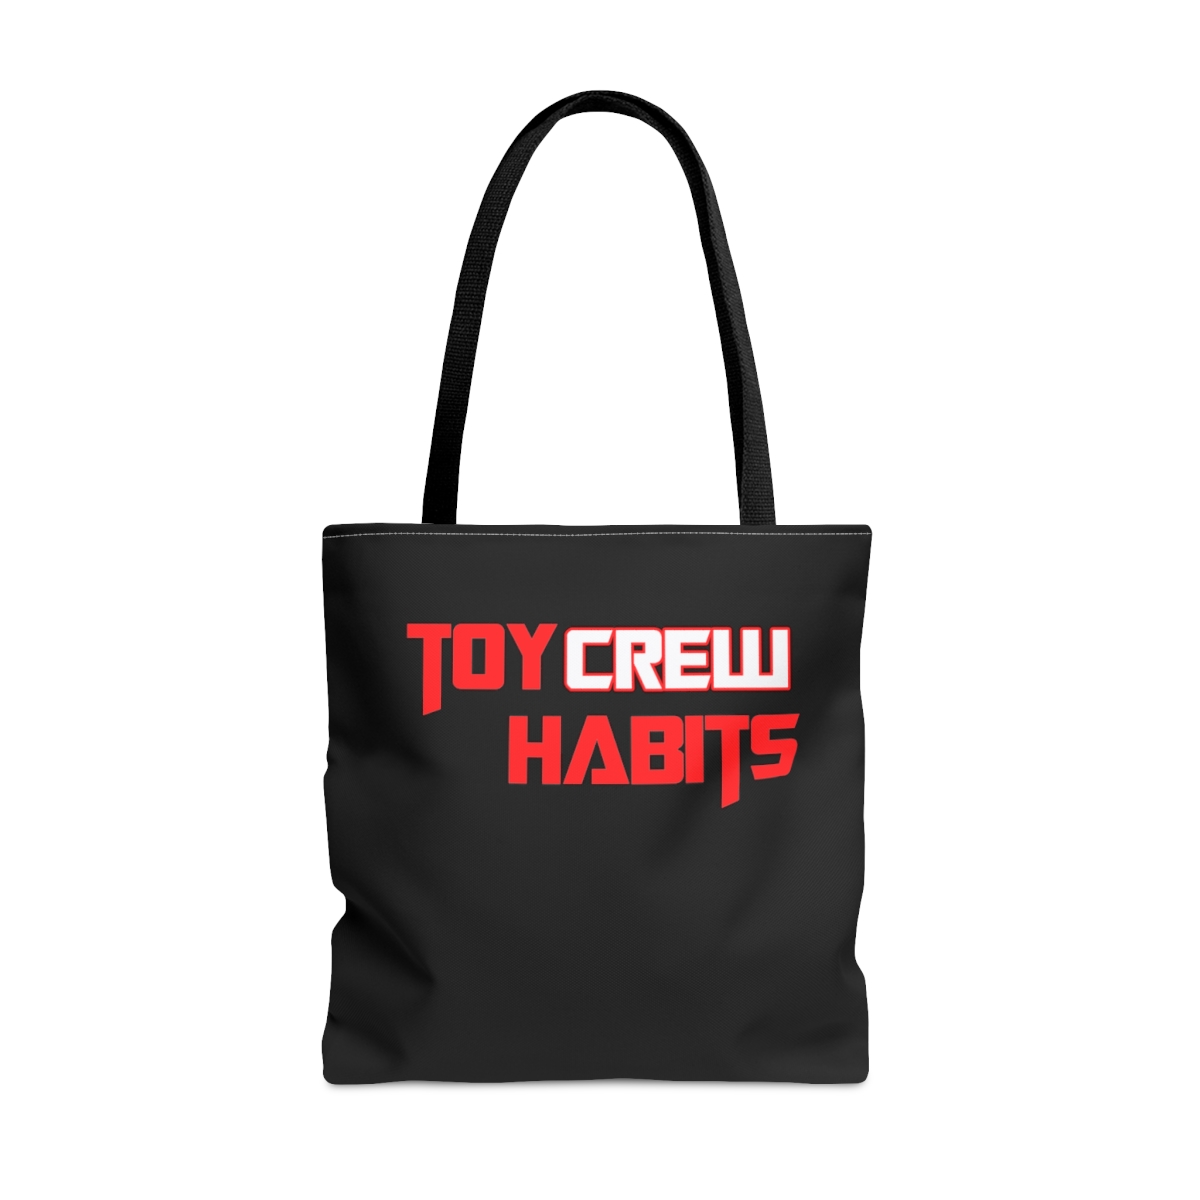 Toy Habits Crew Tote Bag product thumbnail image